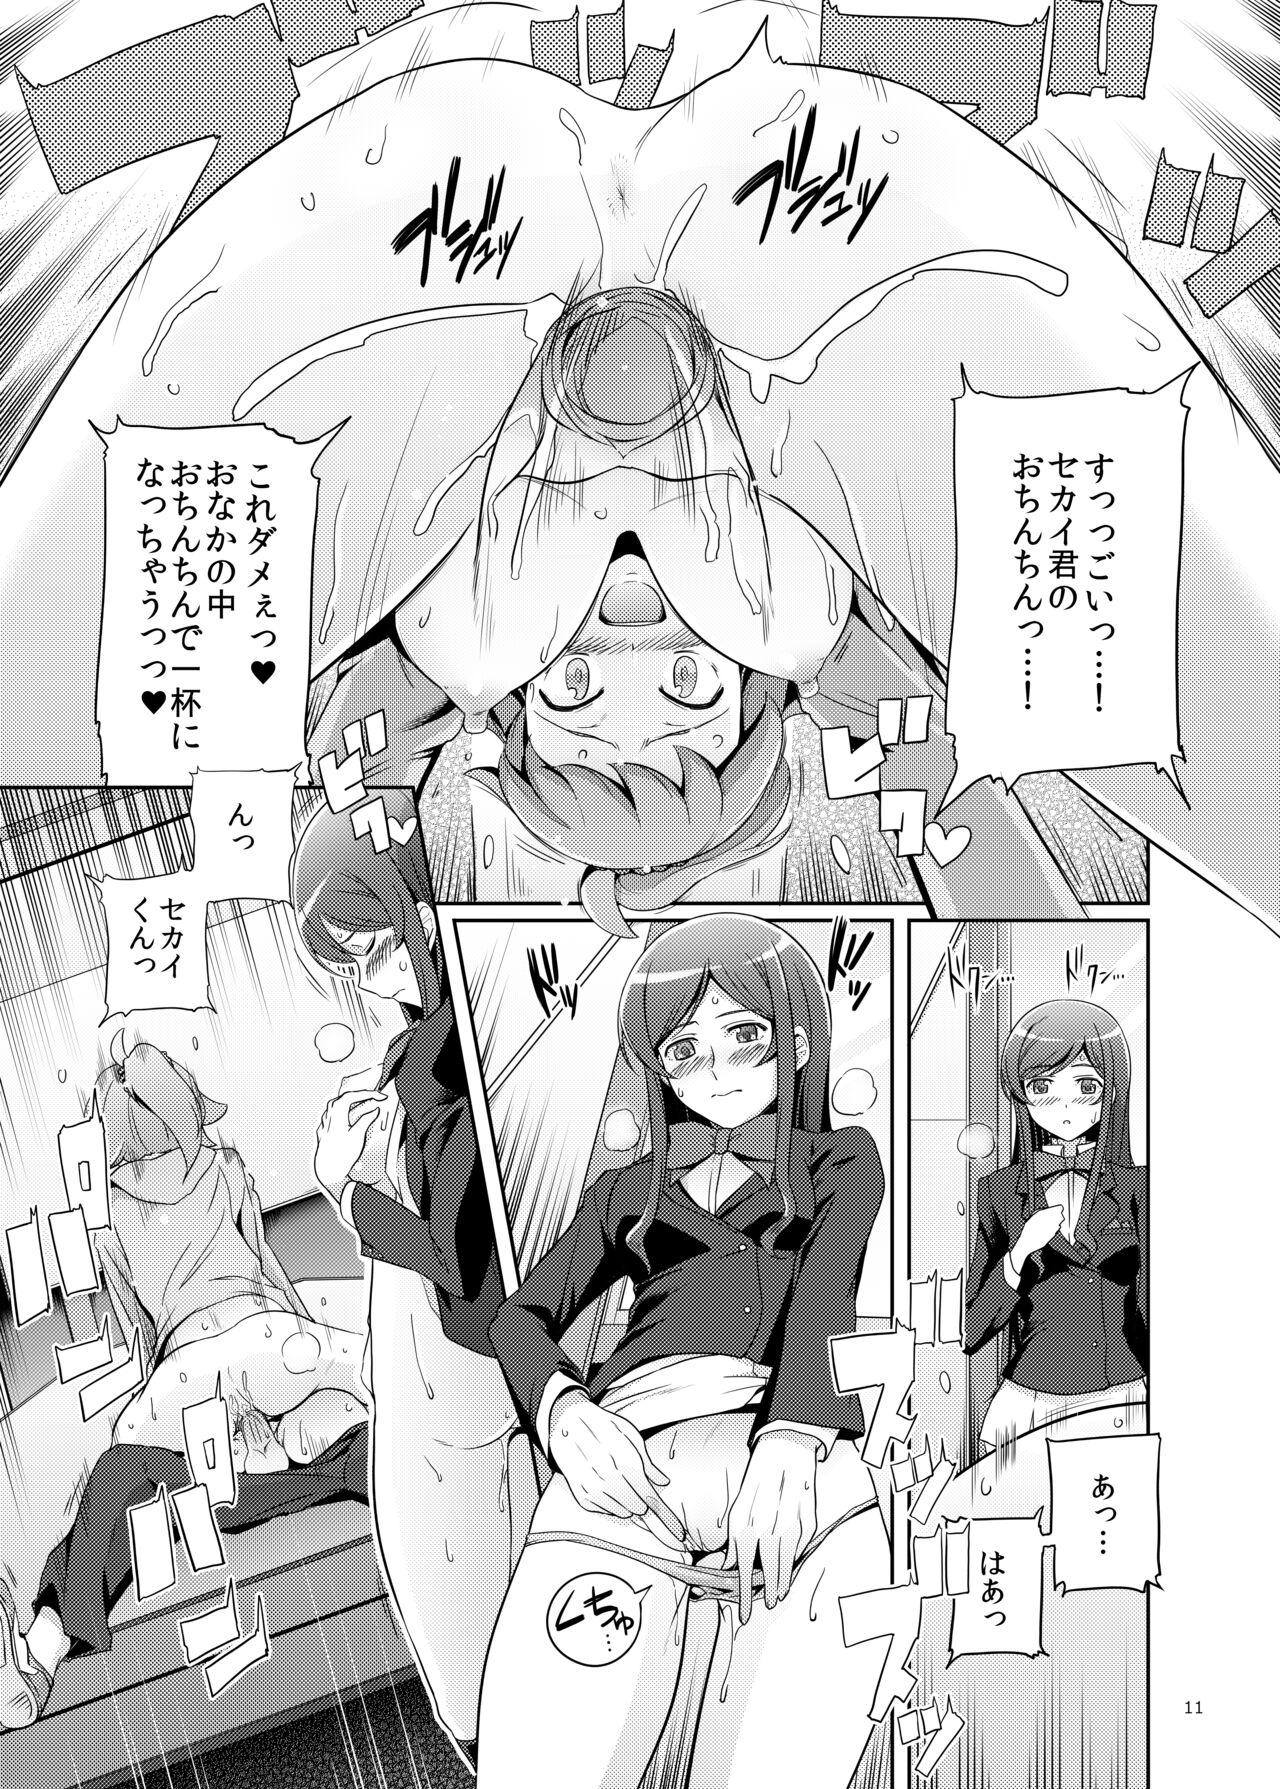 Best Namahame Try! - Gundam build fighters Gundam build fighters try Raw - Page 10